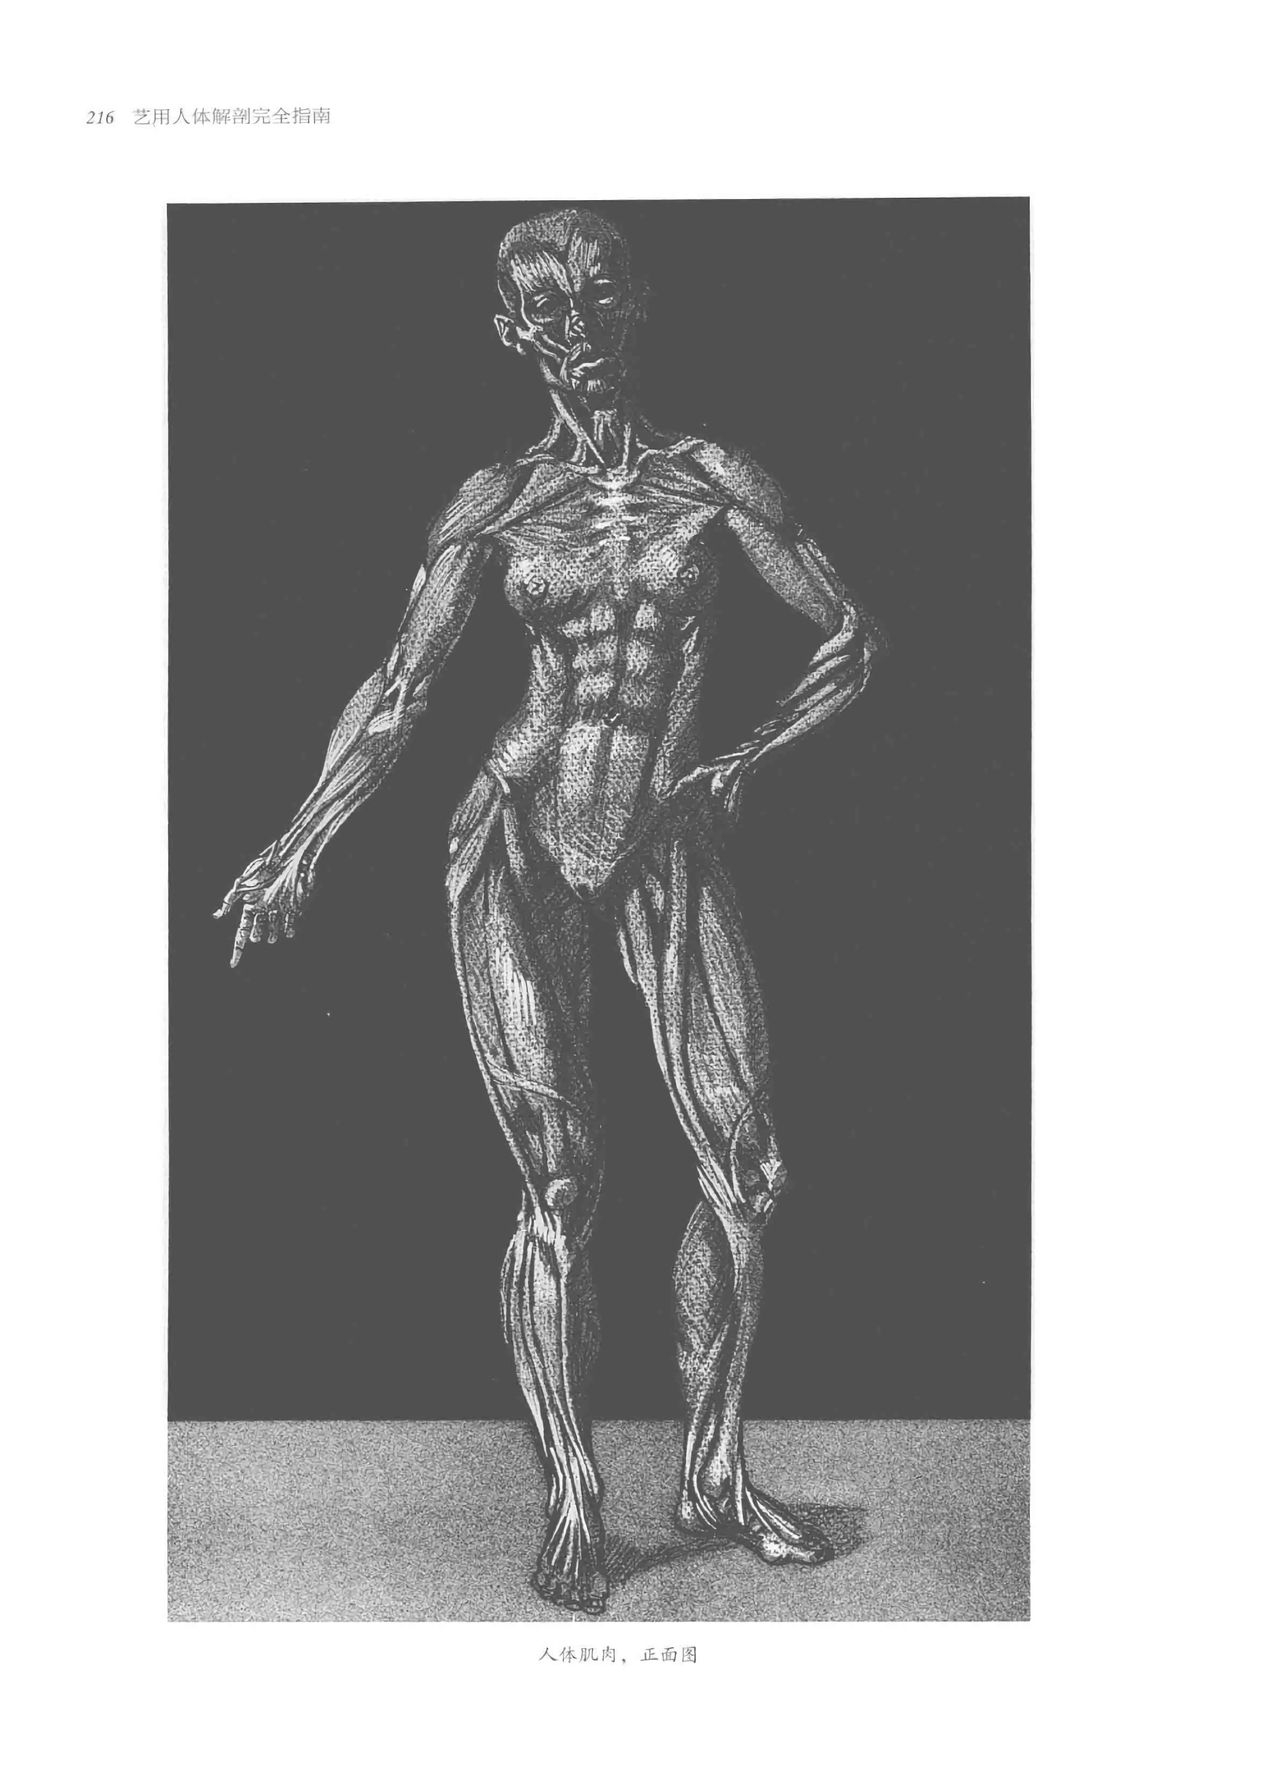 Anatomy-A Complete Guide for Artists - Joseph Sheppard [Chinese] 216